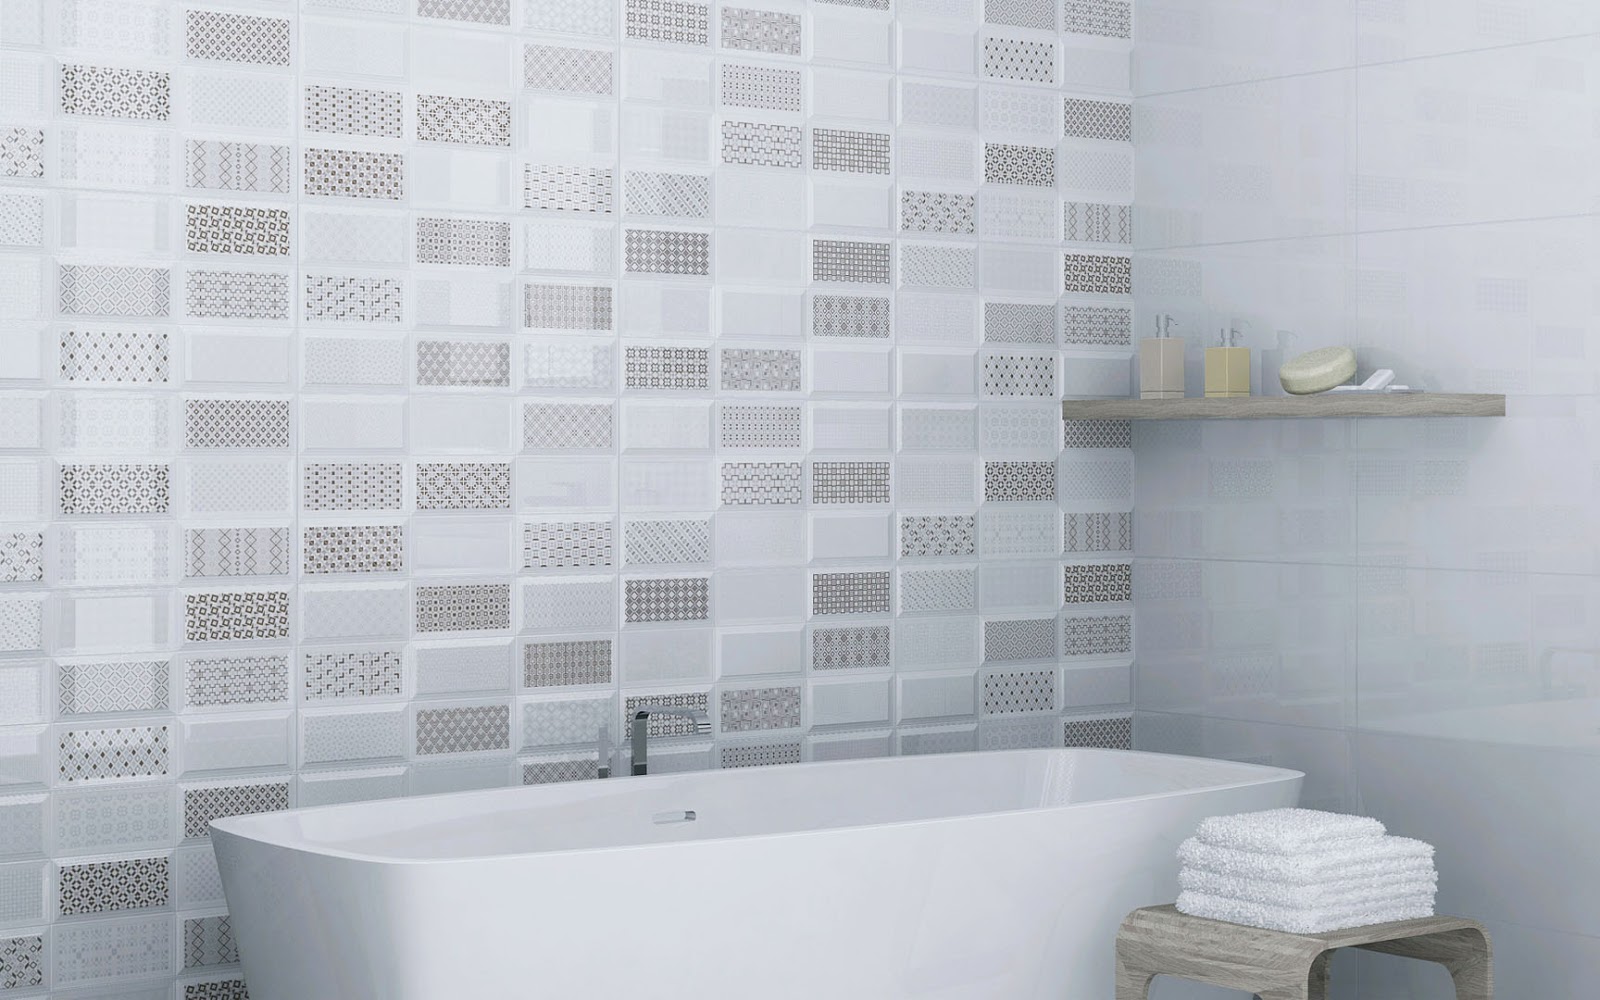 Sell Wall Tile Roman  dSubway from Indonesia by Pusat 